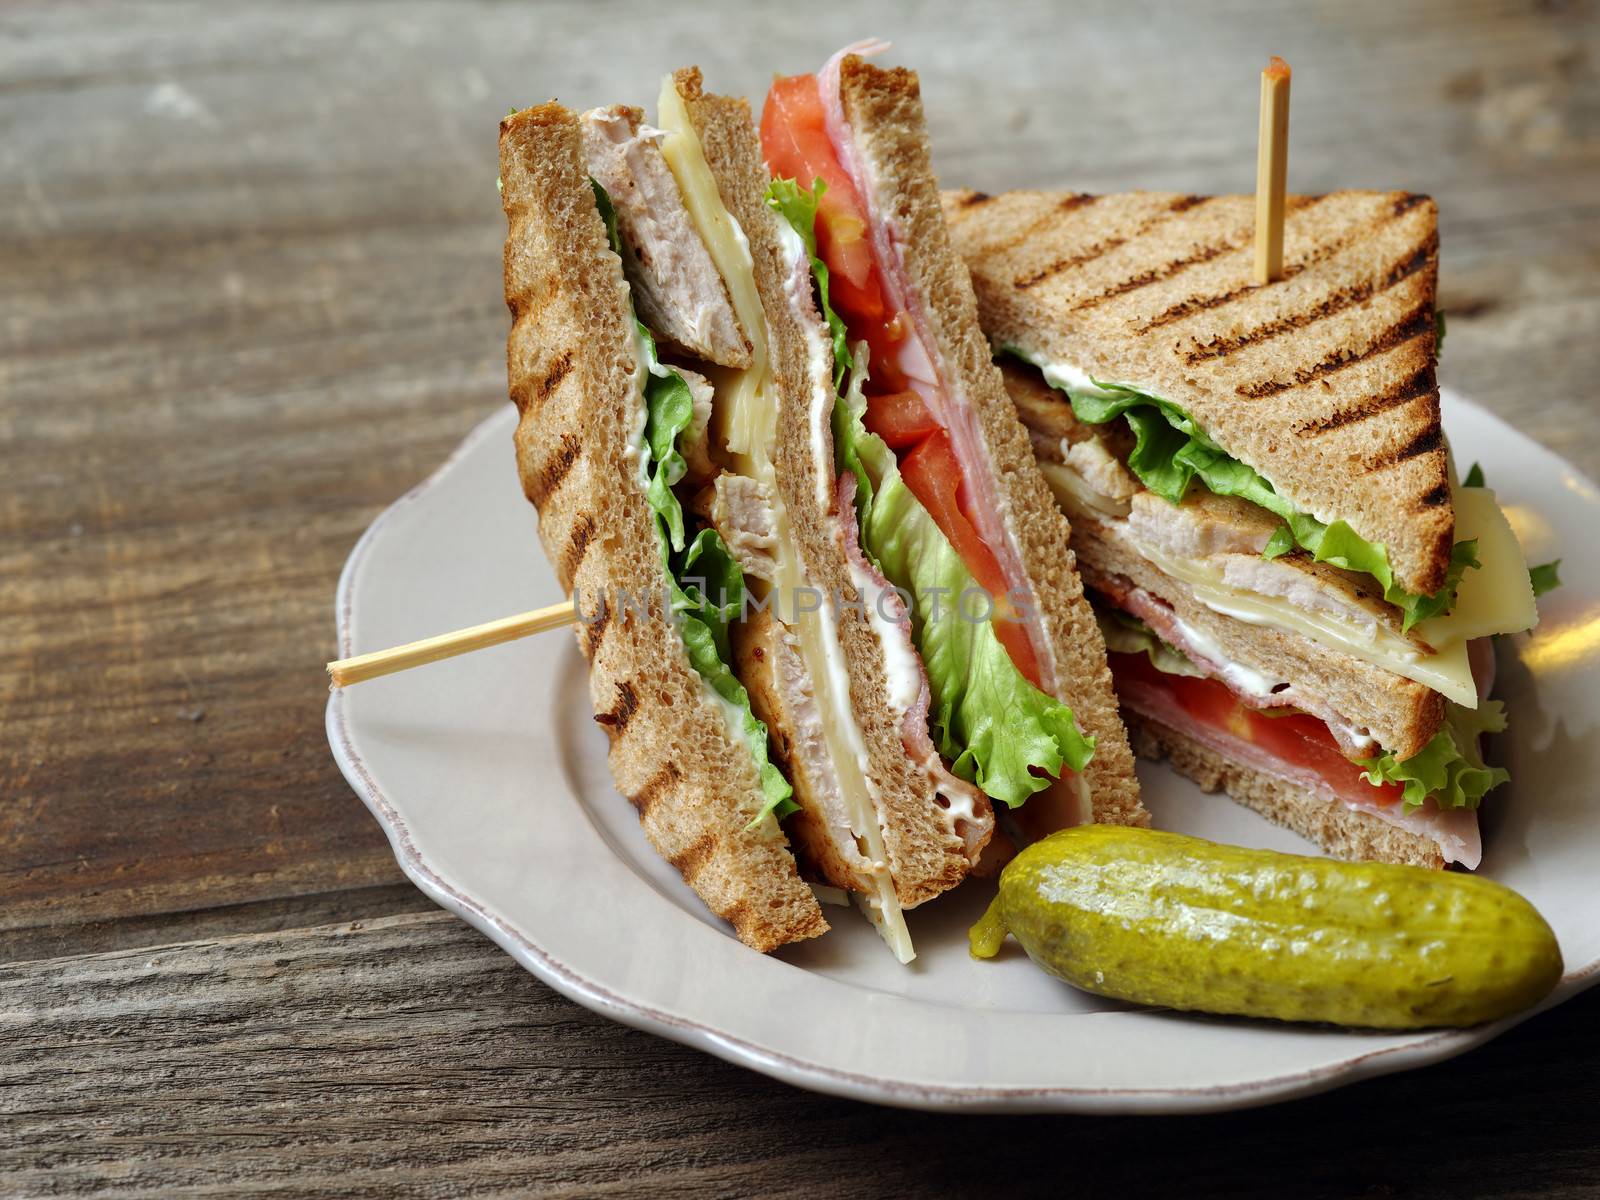 Club sandwich on a plate by sumners